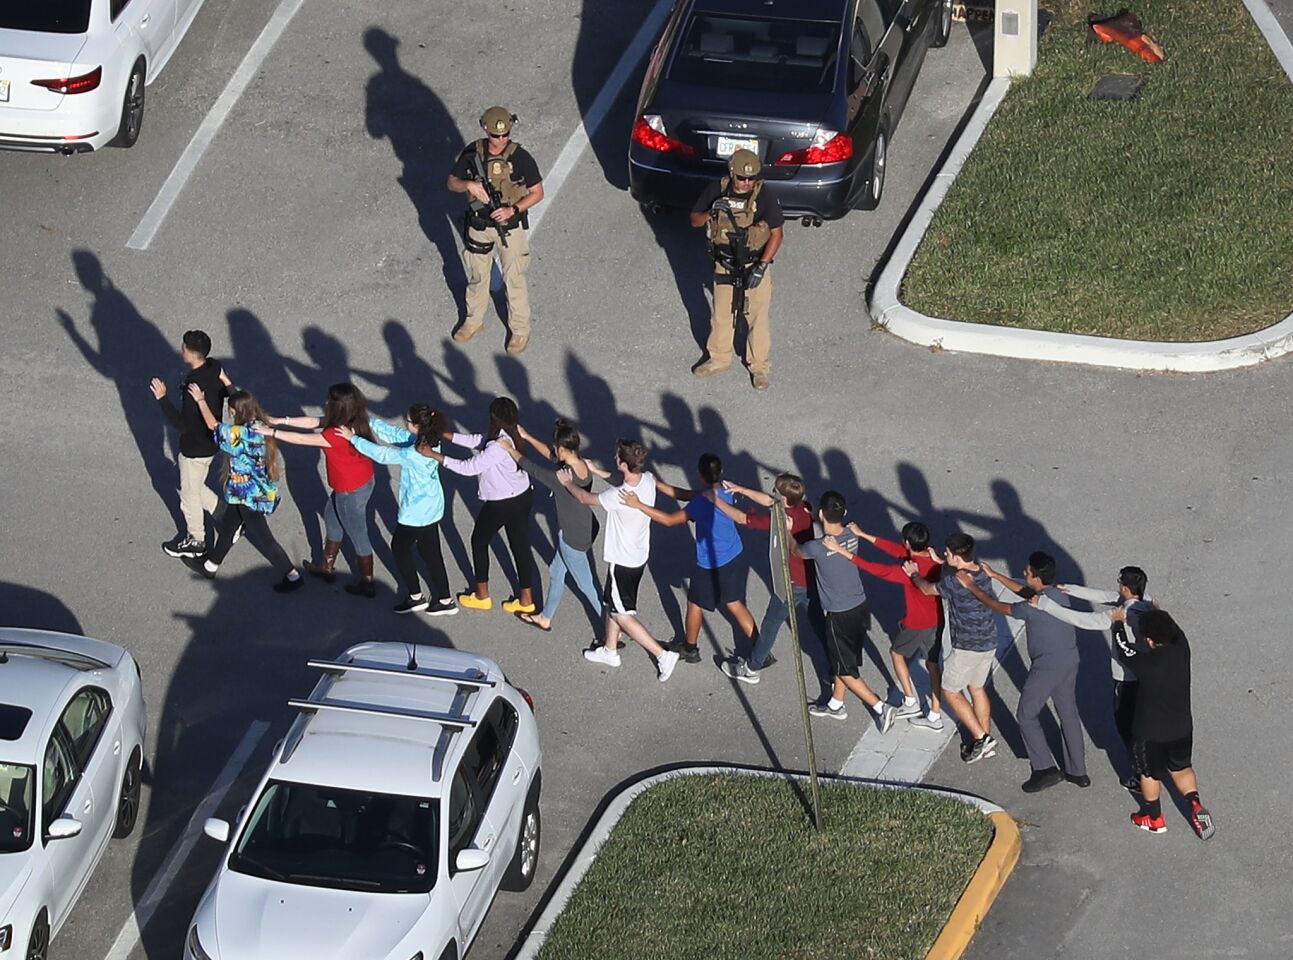 People are brought out of Marjory Stoneman Douglas High School after a gunman opened fire Wednesday.